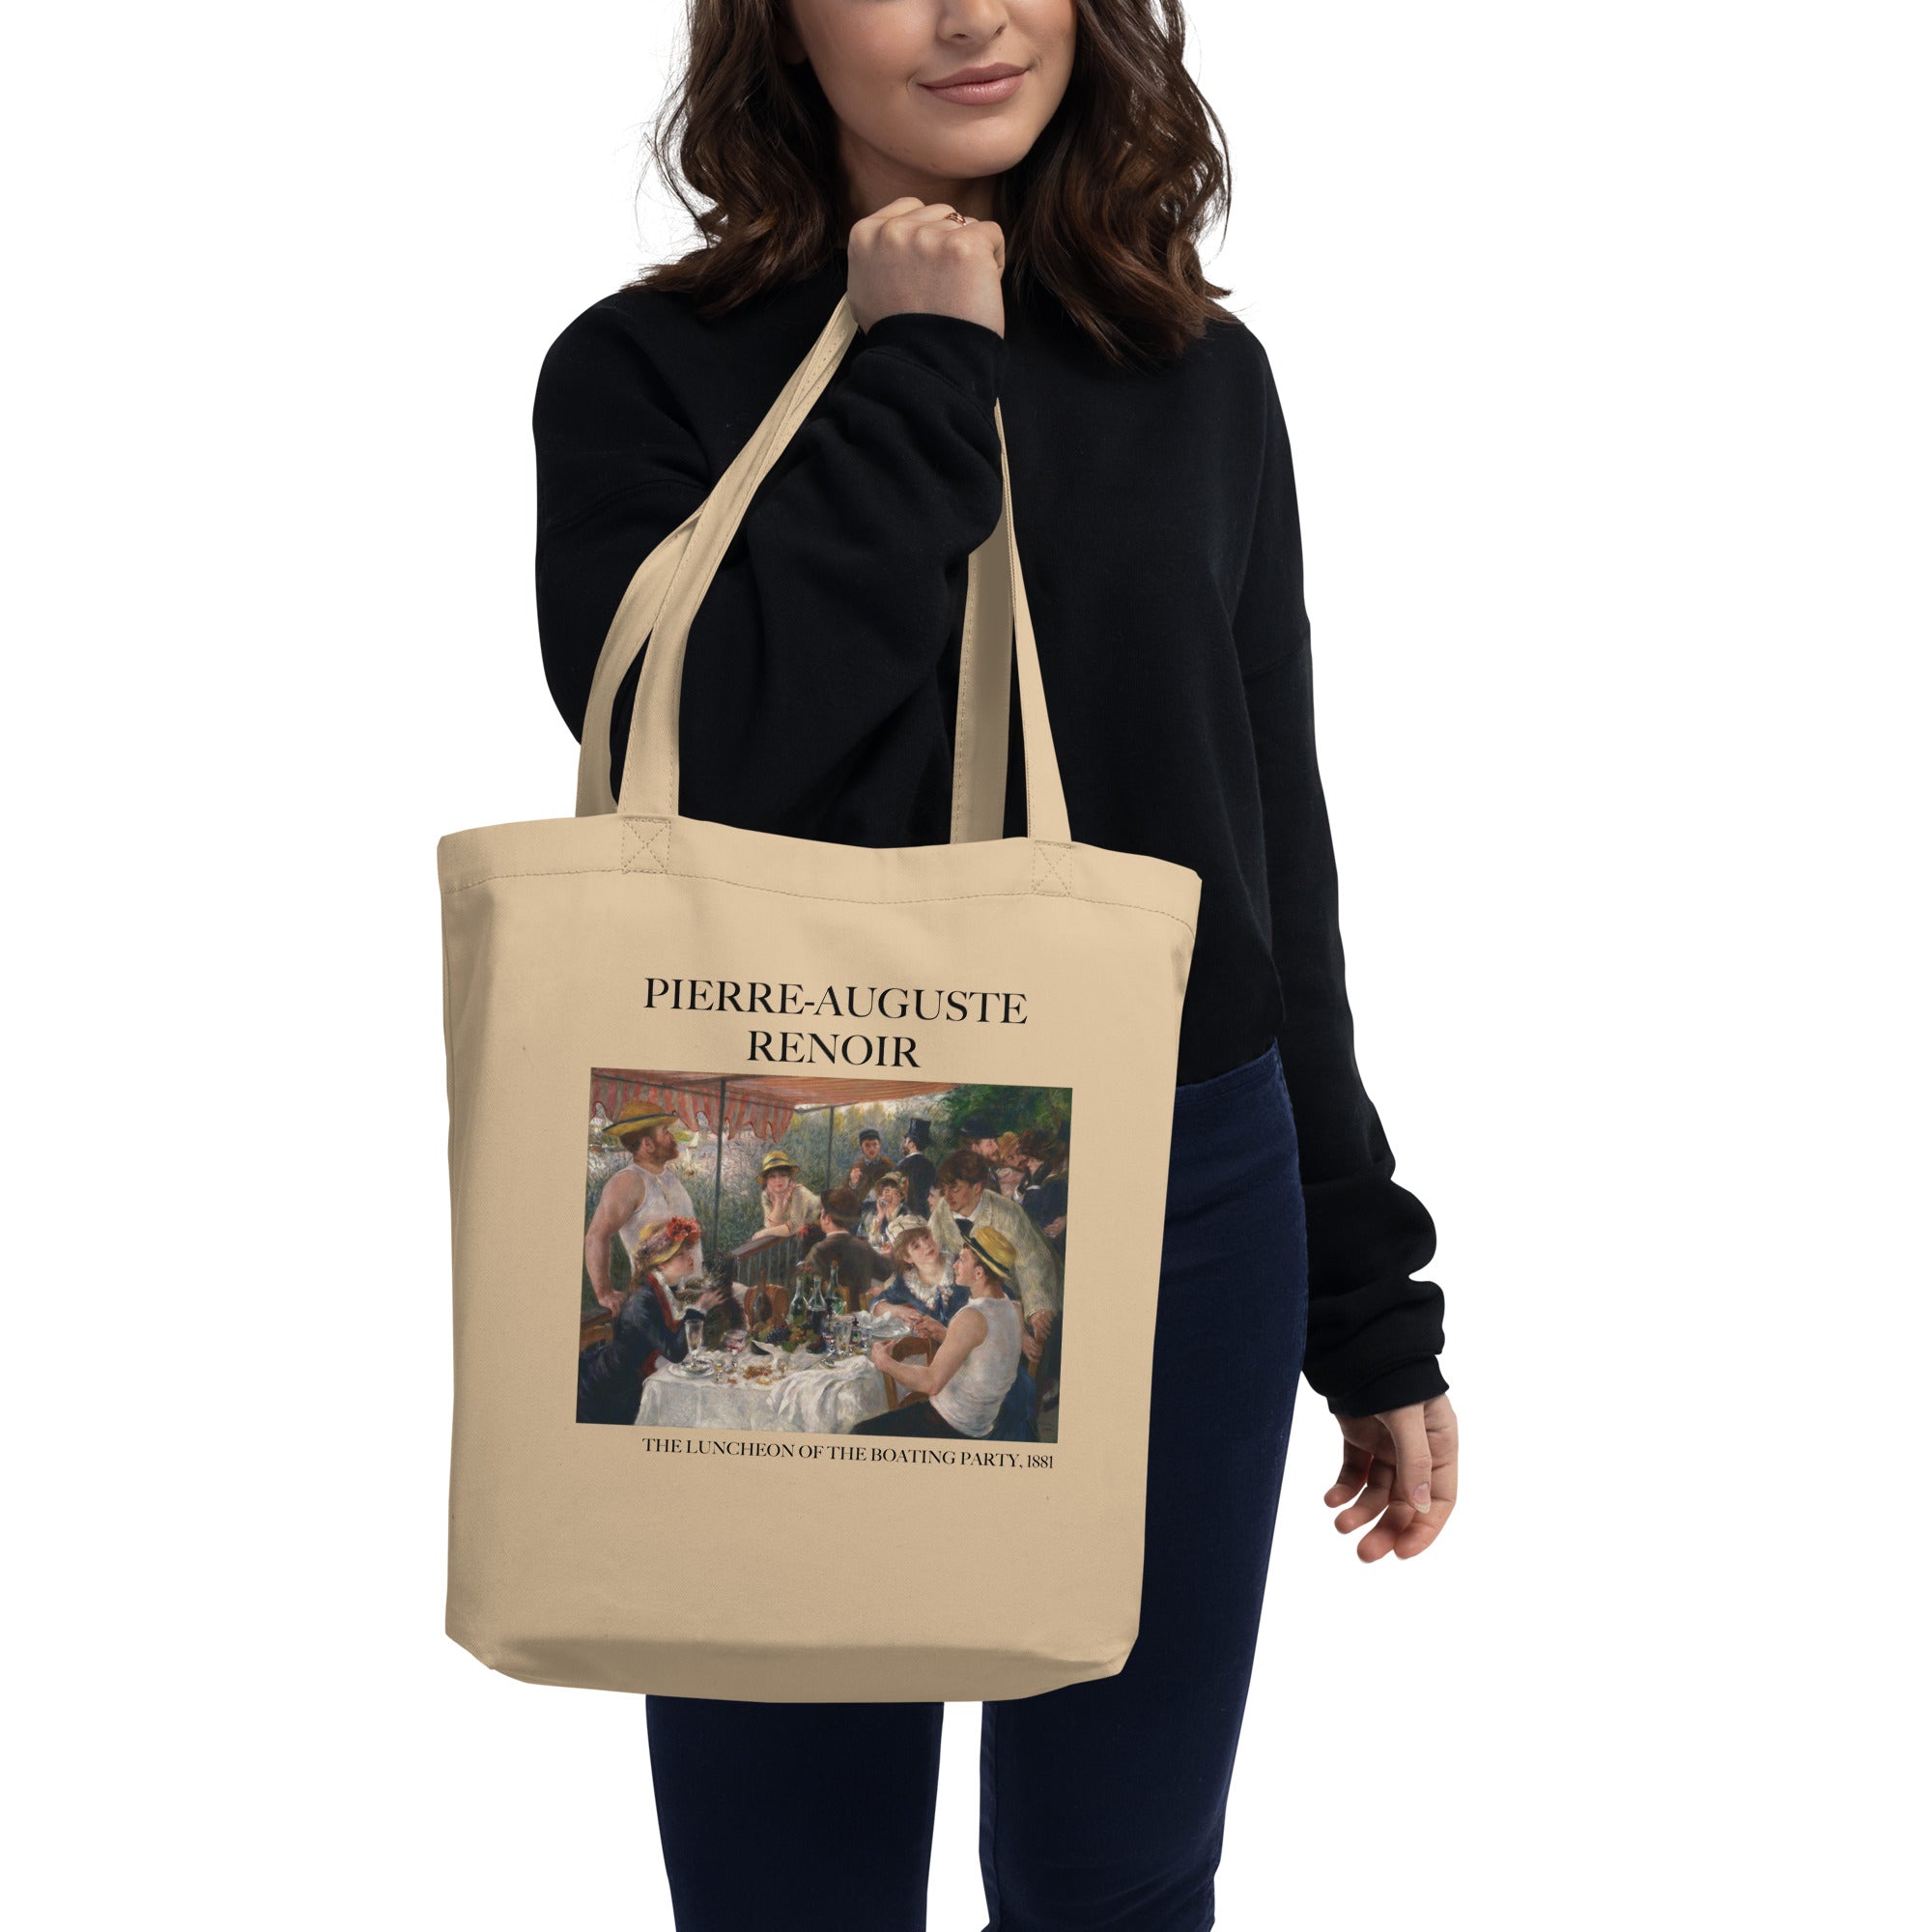 Pierre-Auguste Renoir 'The Luncheon of the Boating Party' Famous Painting Totebag | Eco Friendly Art Tote Bag